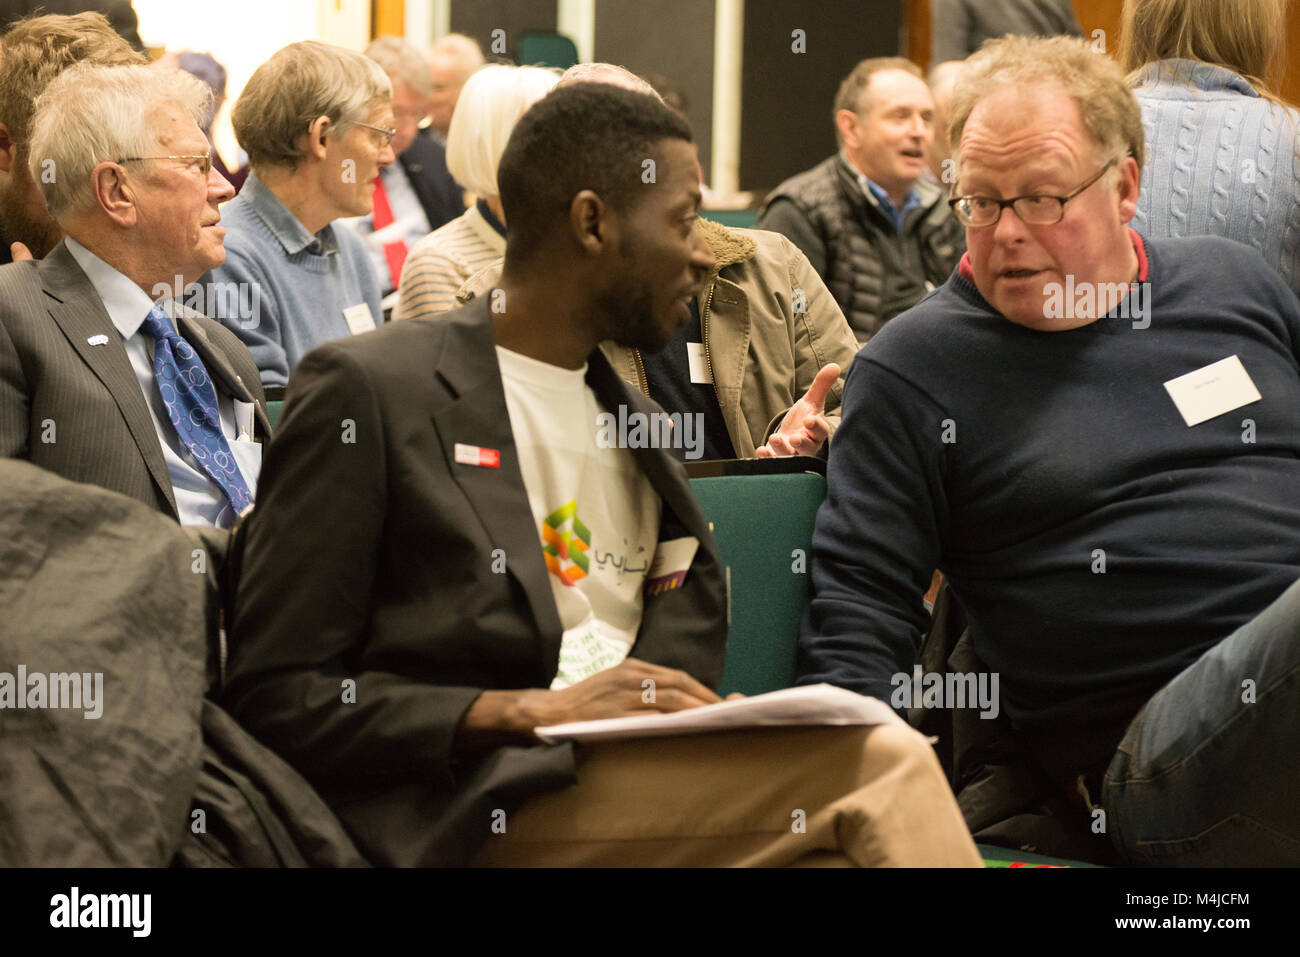 Manchester, UK. 16th Feb, 2018. People attend the 'Ways Forward 6 Conference: Co-operative Solidarity' event in Manchester, United Kingdom on February 16, 2018. The Ways Forward 6 Conference: Co-operative Solidarity event was hosted by the Co-Operative Business Consultants to debate new ways for people to work together to take back control of business. Credit: Jonathan Nicholson/Pacific Press/Alamy Live News Stock Photo